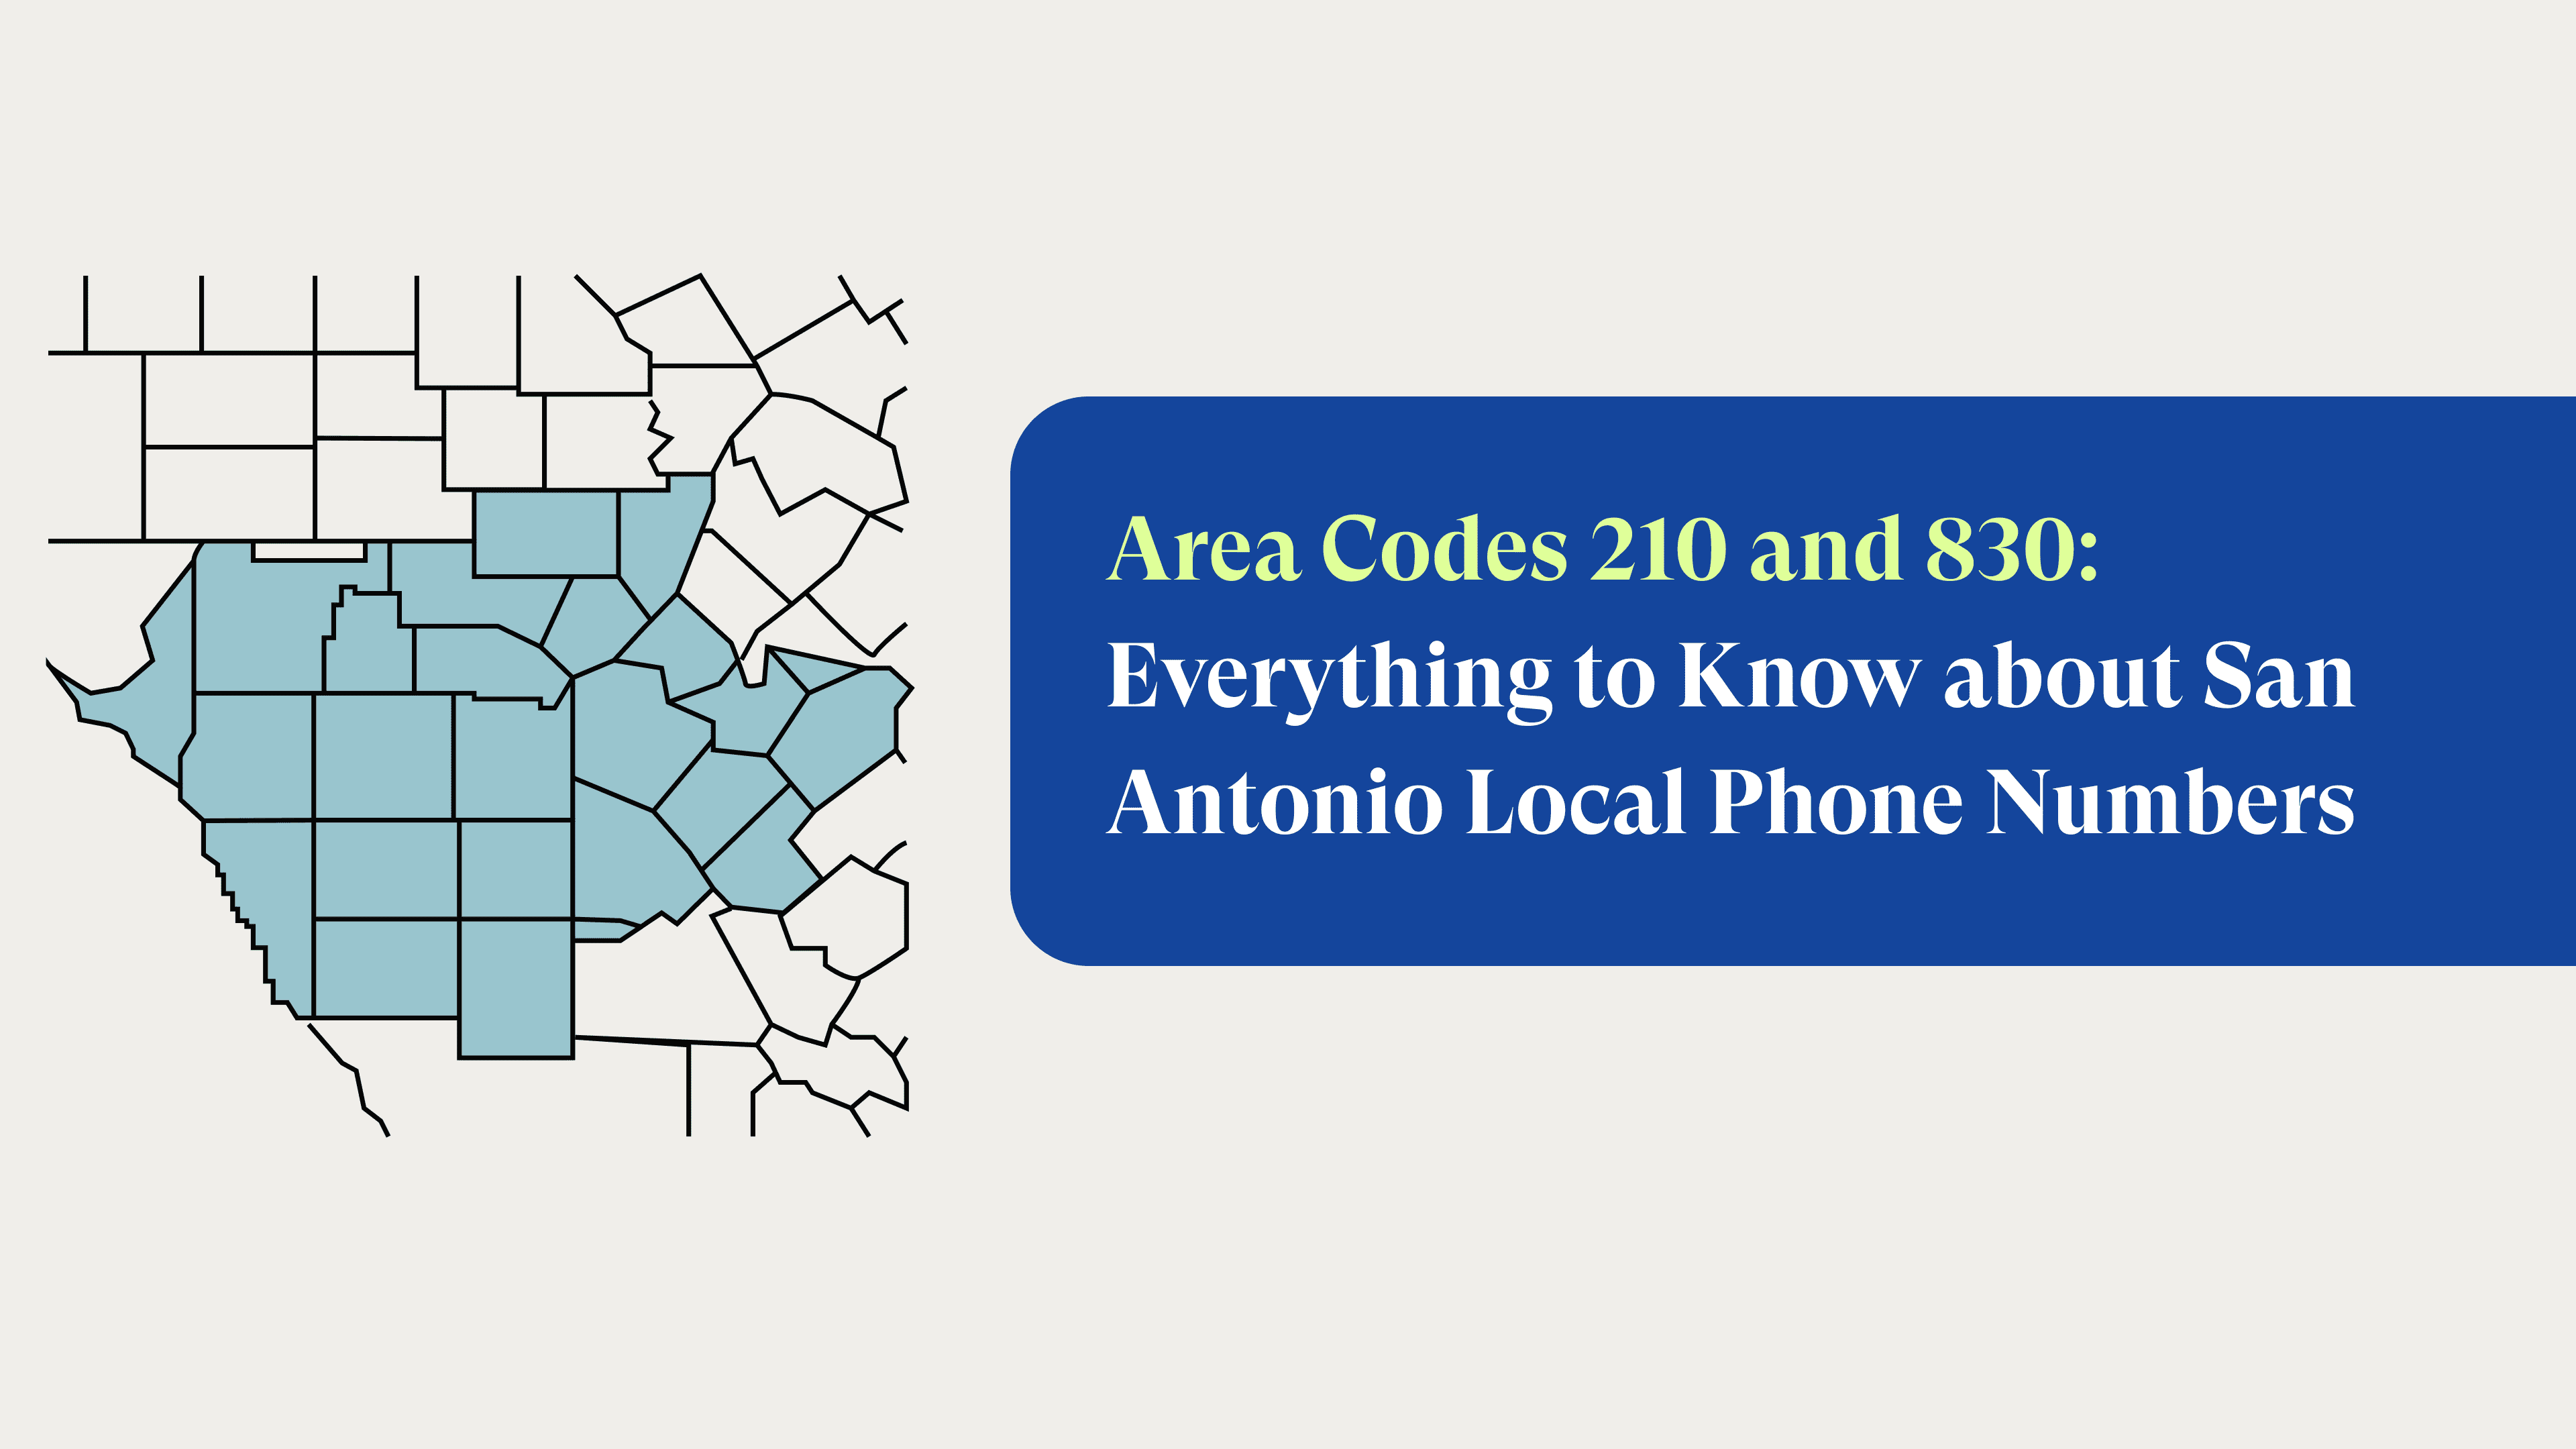 Area Codes 210 and 830: Everything to Know about San Antonio Local Phone Numbers